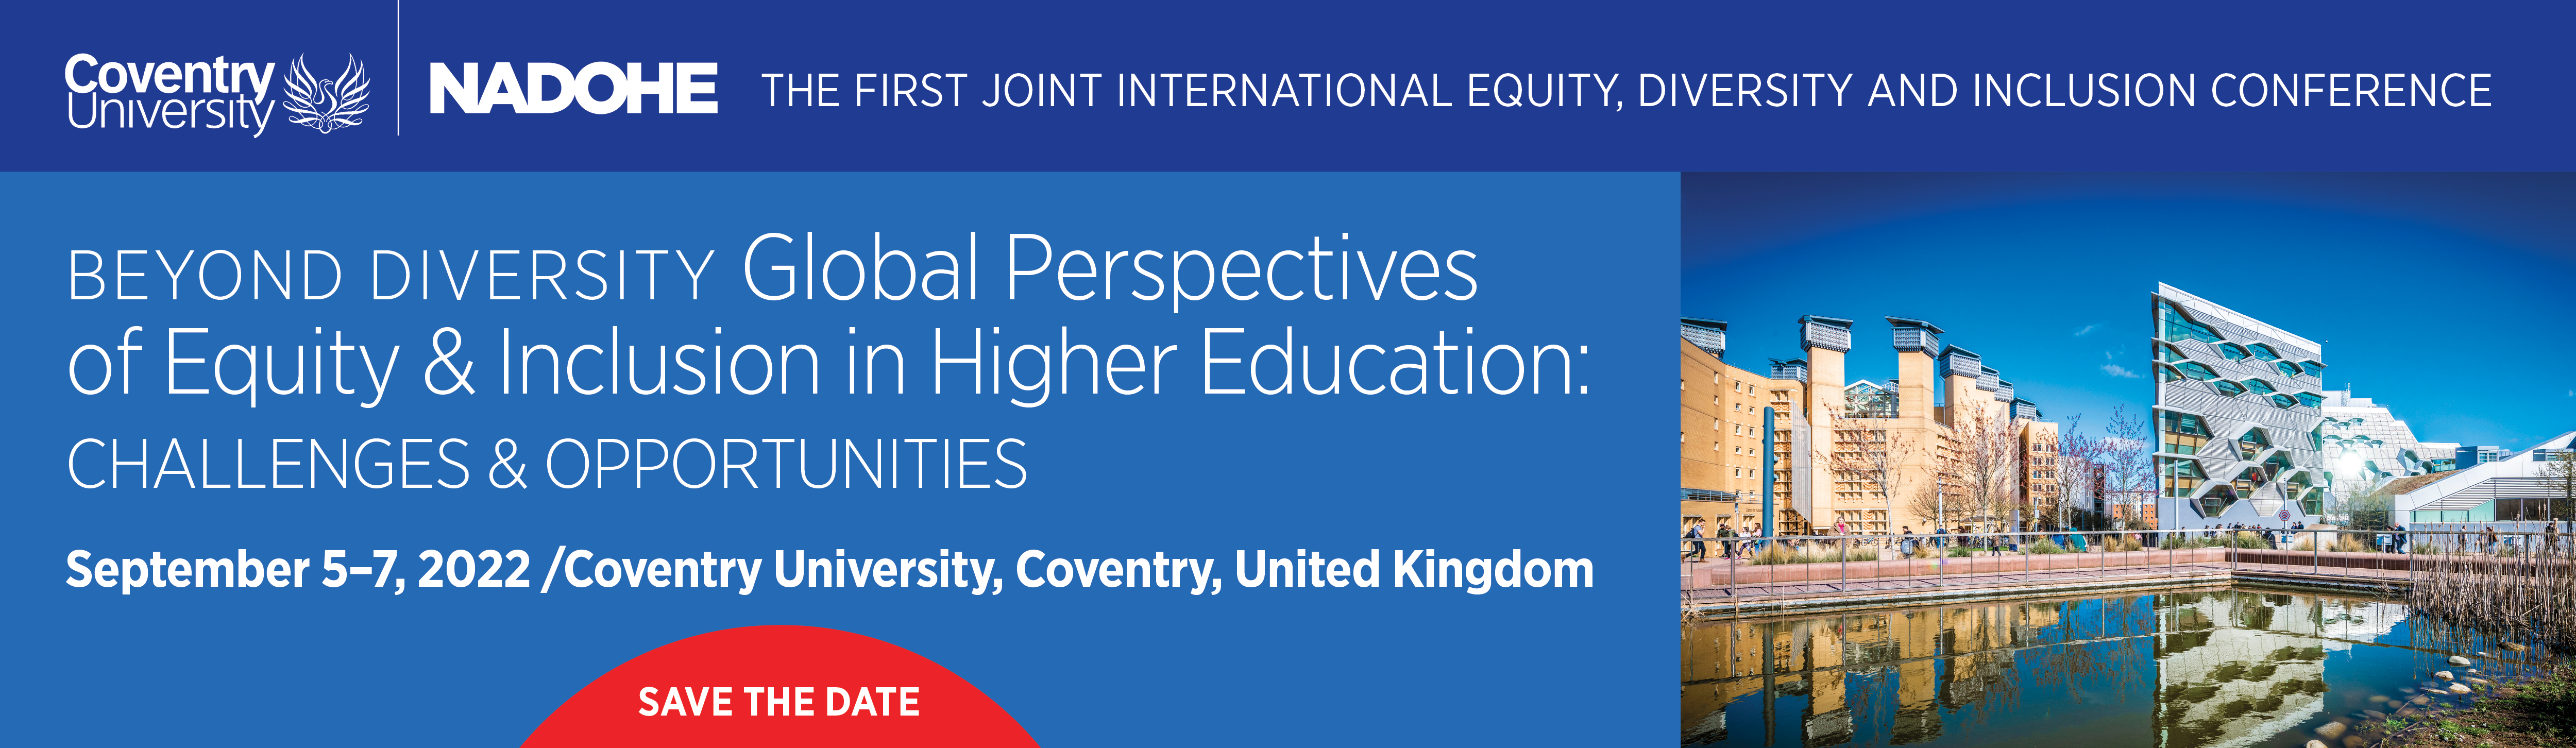 Beyond Diversity, Global Perspectives of Equity and Inclusion in Higher Education, Save the date! September 5-7, 2022 / Coventry University, Coventry, UK